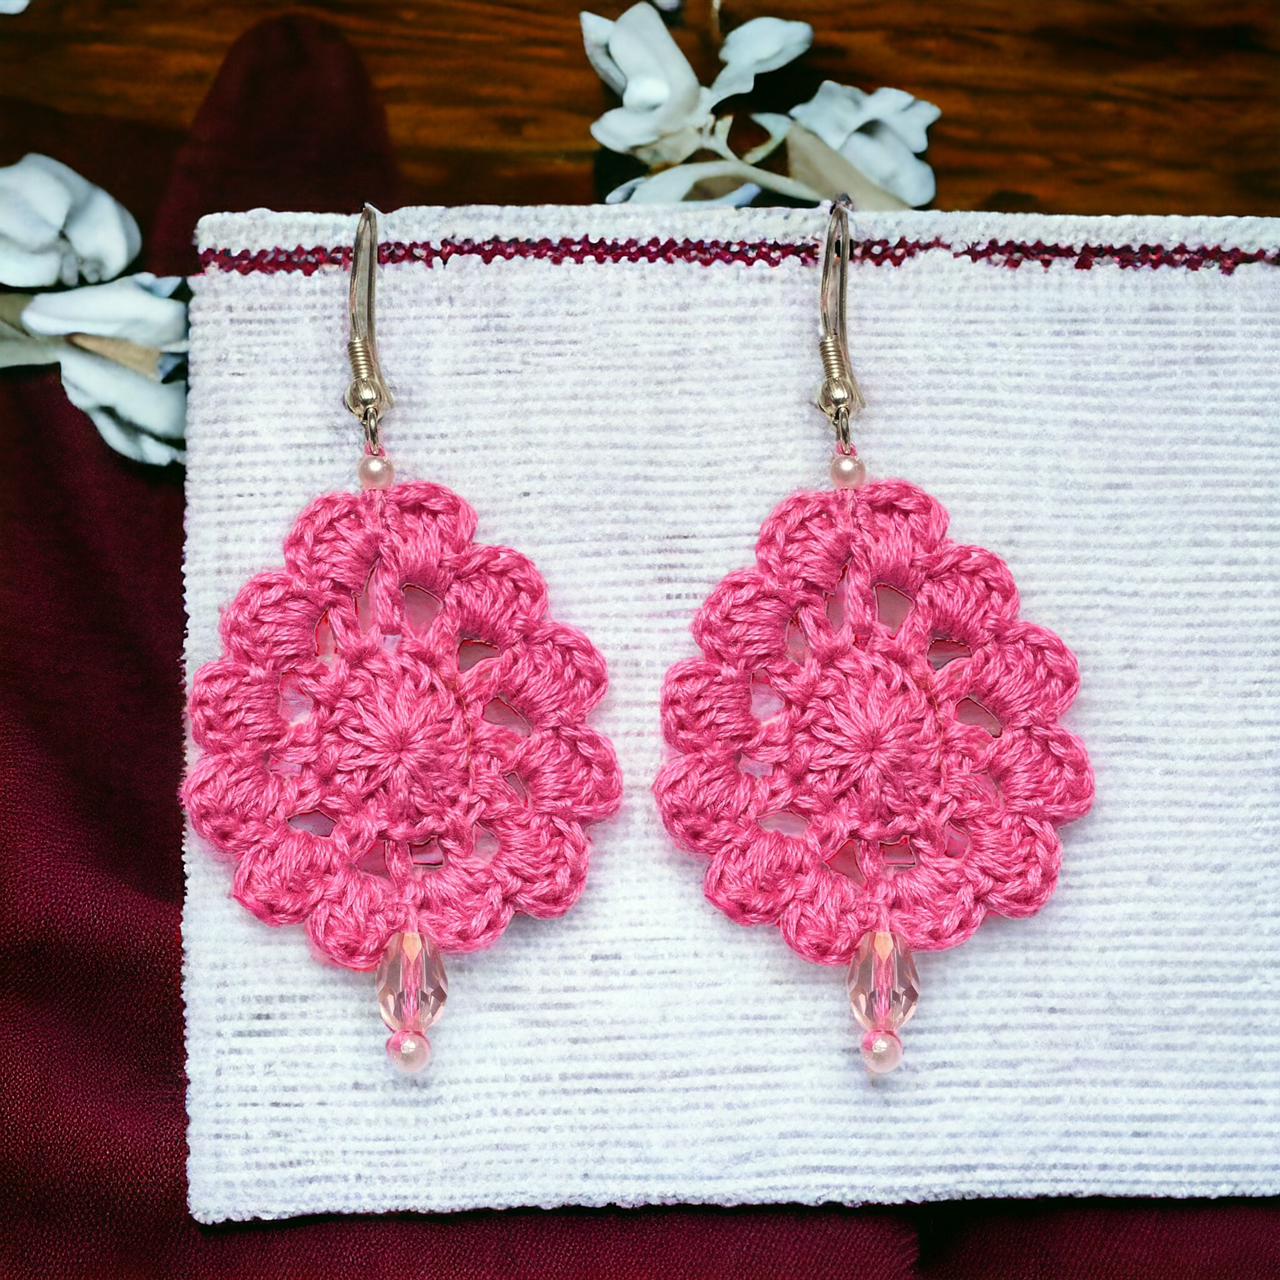 Rounded shaped Crochet earrings pink